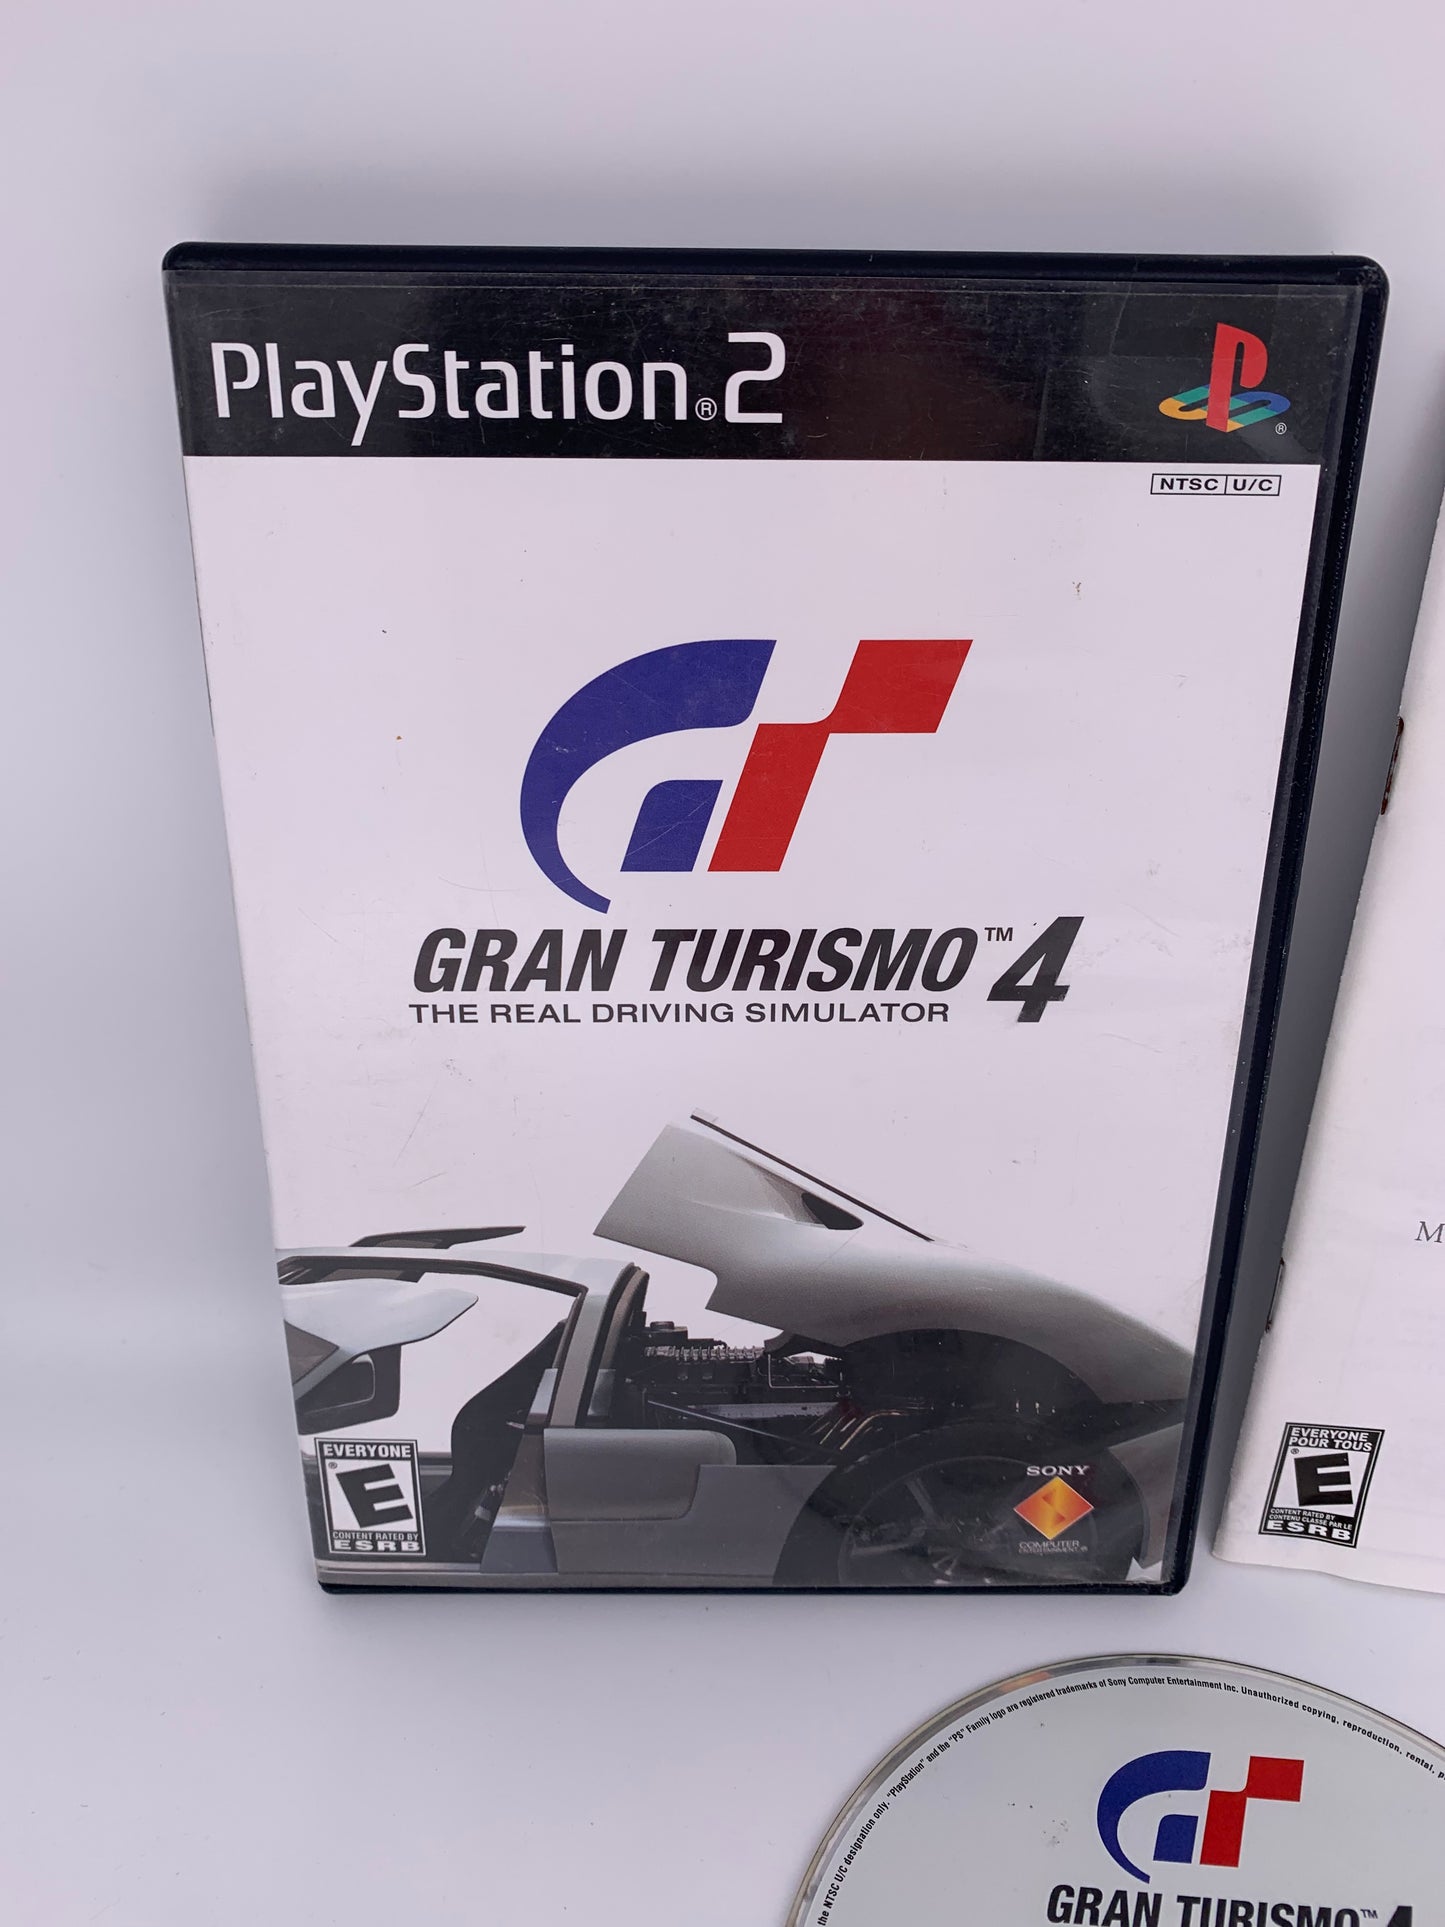 SONY PLAYSTATiON 2 [PS2] | GRAN TURiSMO 4 GT4 THE REAL DRiViNG SIMULATOR | GREATEST HiTS